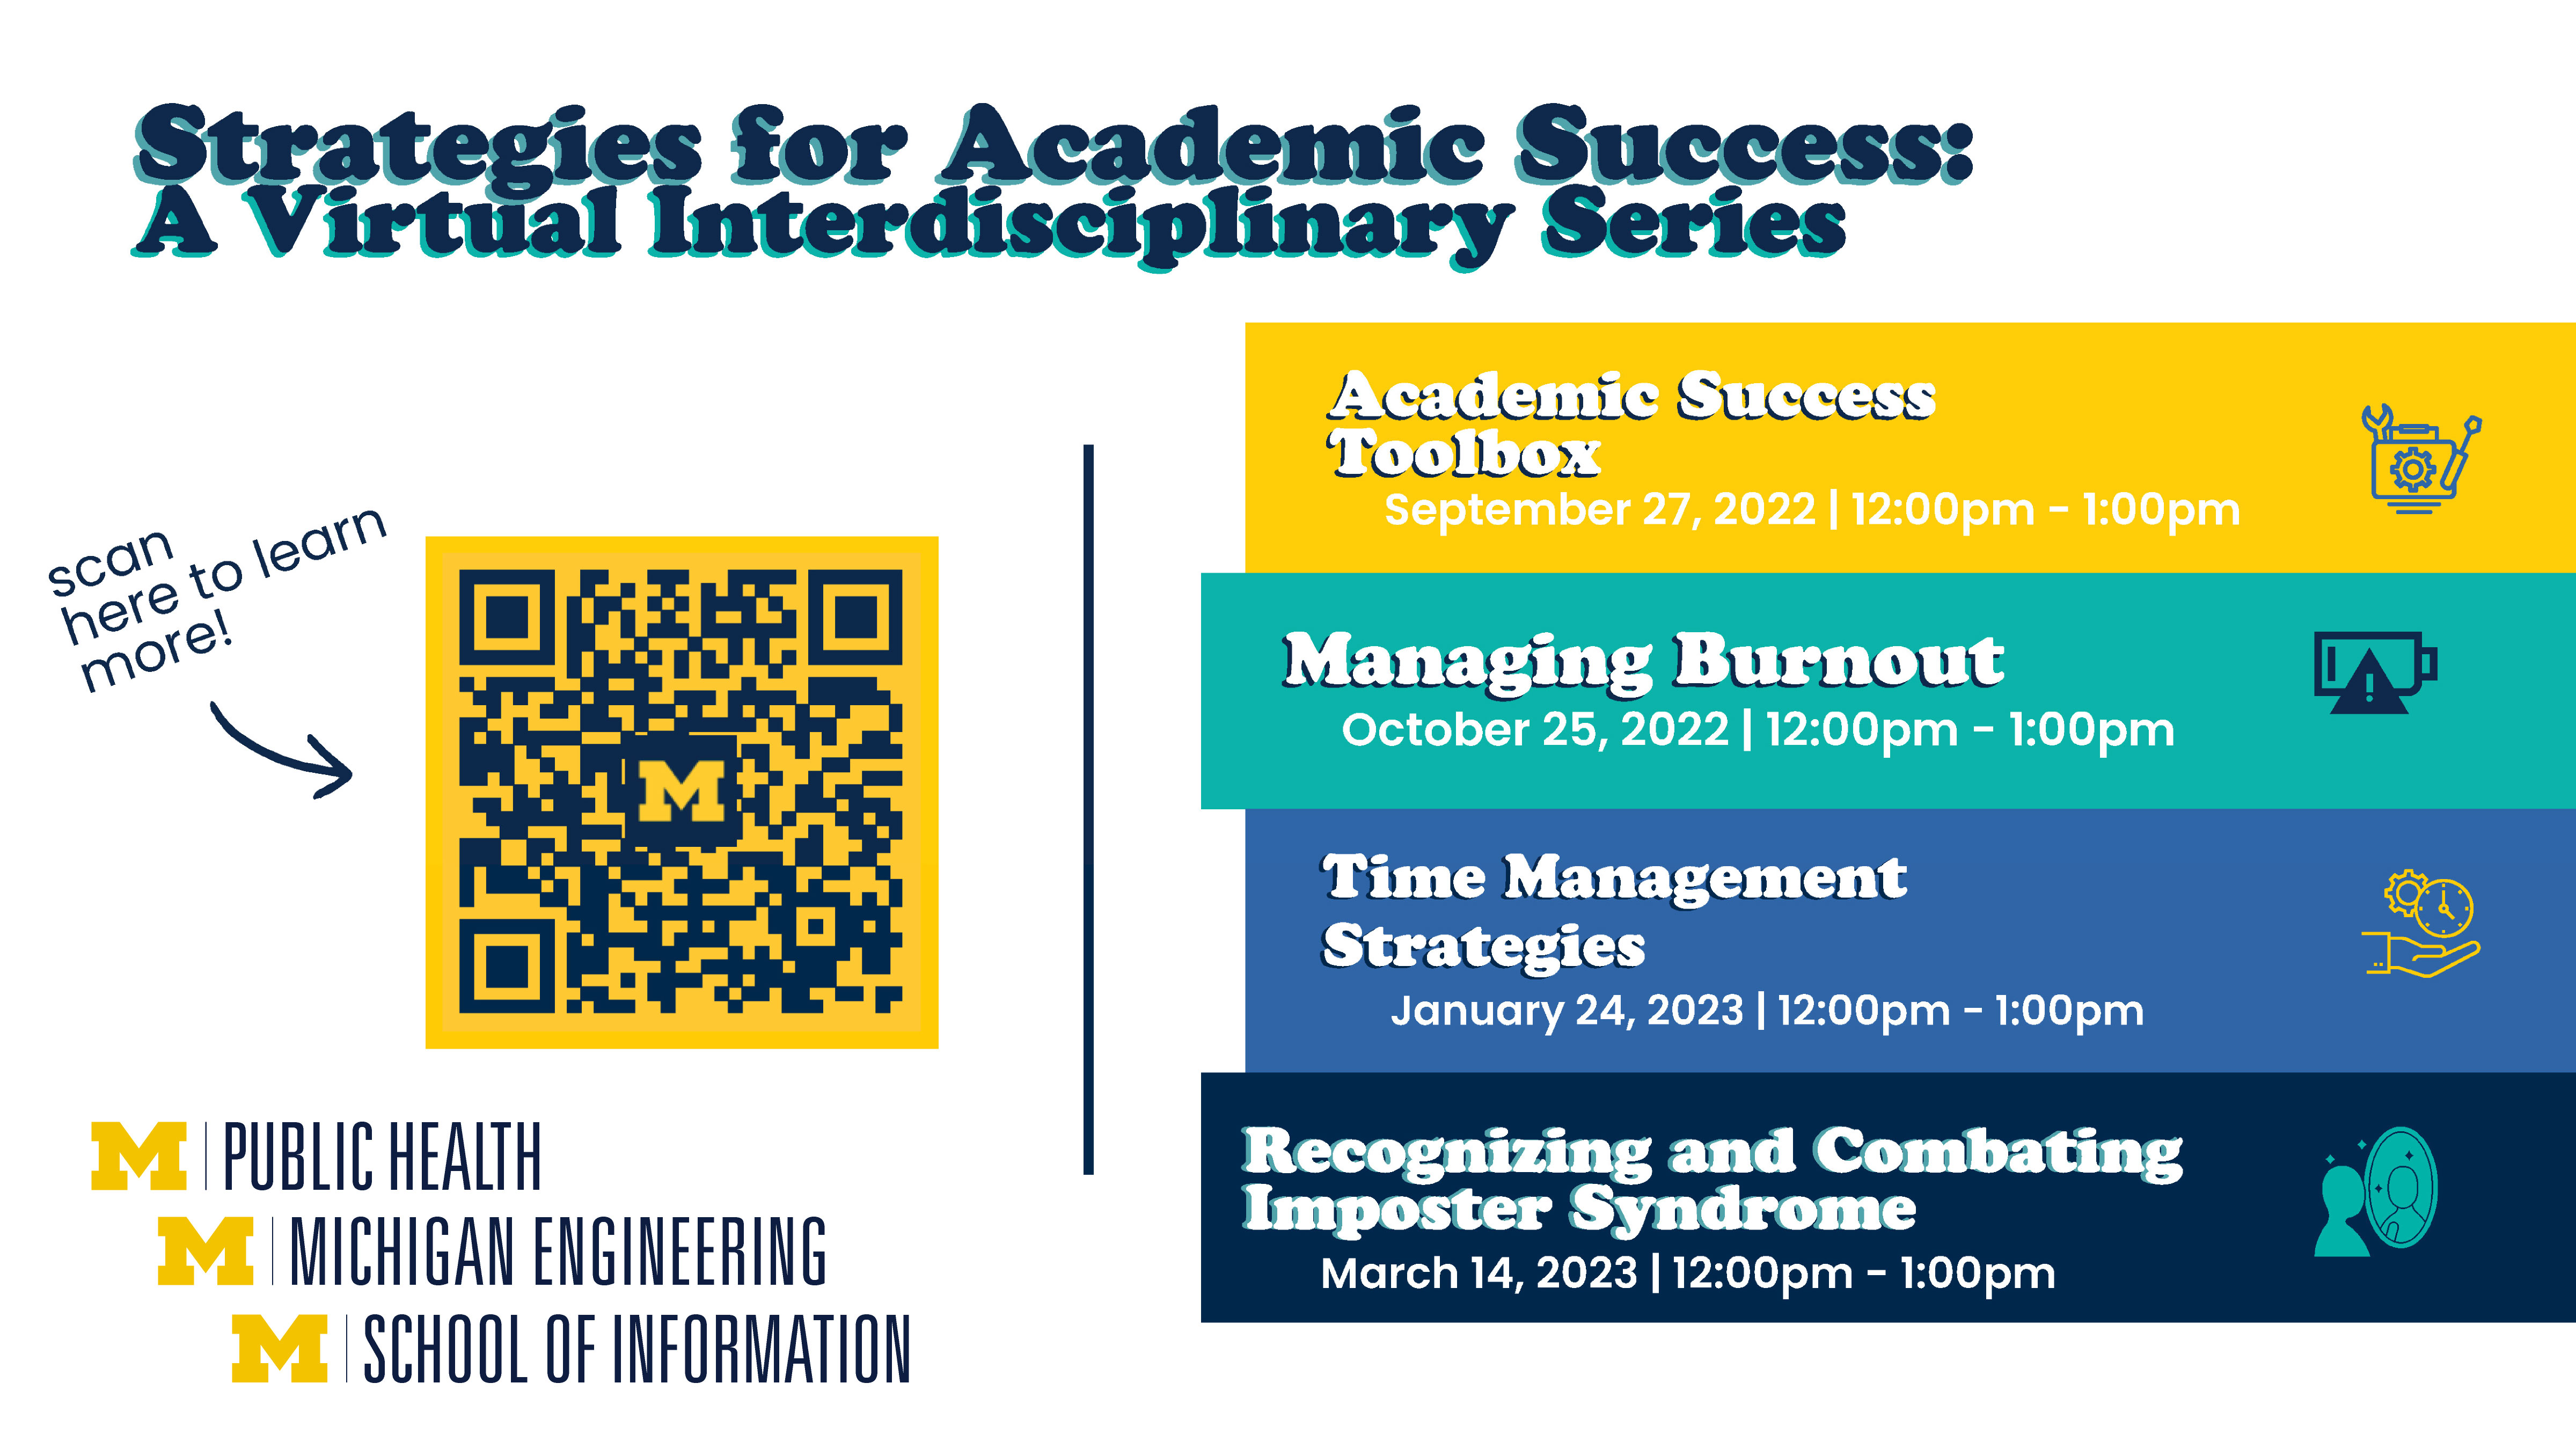 “Strategies for Academic Success: A Virtual Interdisciplinary Series. Academic Success Toolbox. September 27, 2022. 12 pm - 1 pm. Managing Burnout. October 25, 2022. 12 pm - 1 pm. Time Management Strategies. January 24, 2023. 12 pm - 1 pm. Recognizing and Combating Imposter Syndrome. March 14, 2023.  12 pm - 1 pm.” An arrow points to a QR code on the left half of the graphic. “Scan here to learn more!” Logos for University of Michigan Schools of Public Health, Engineering, and Information.